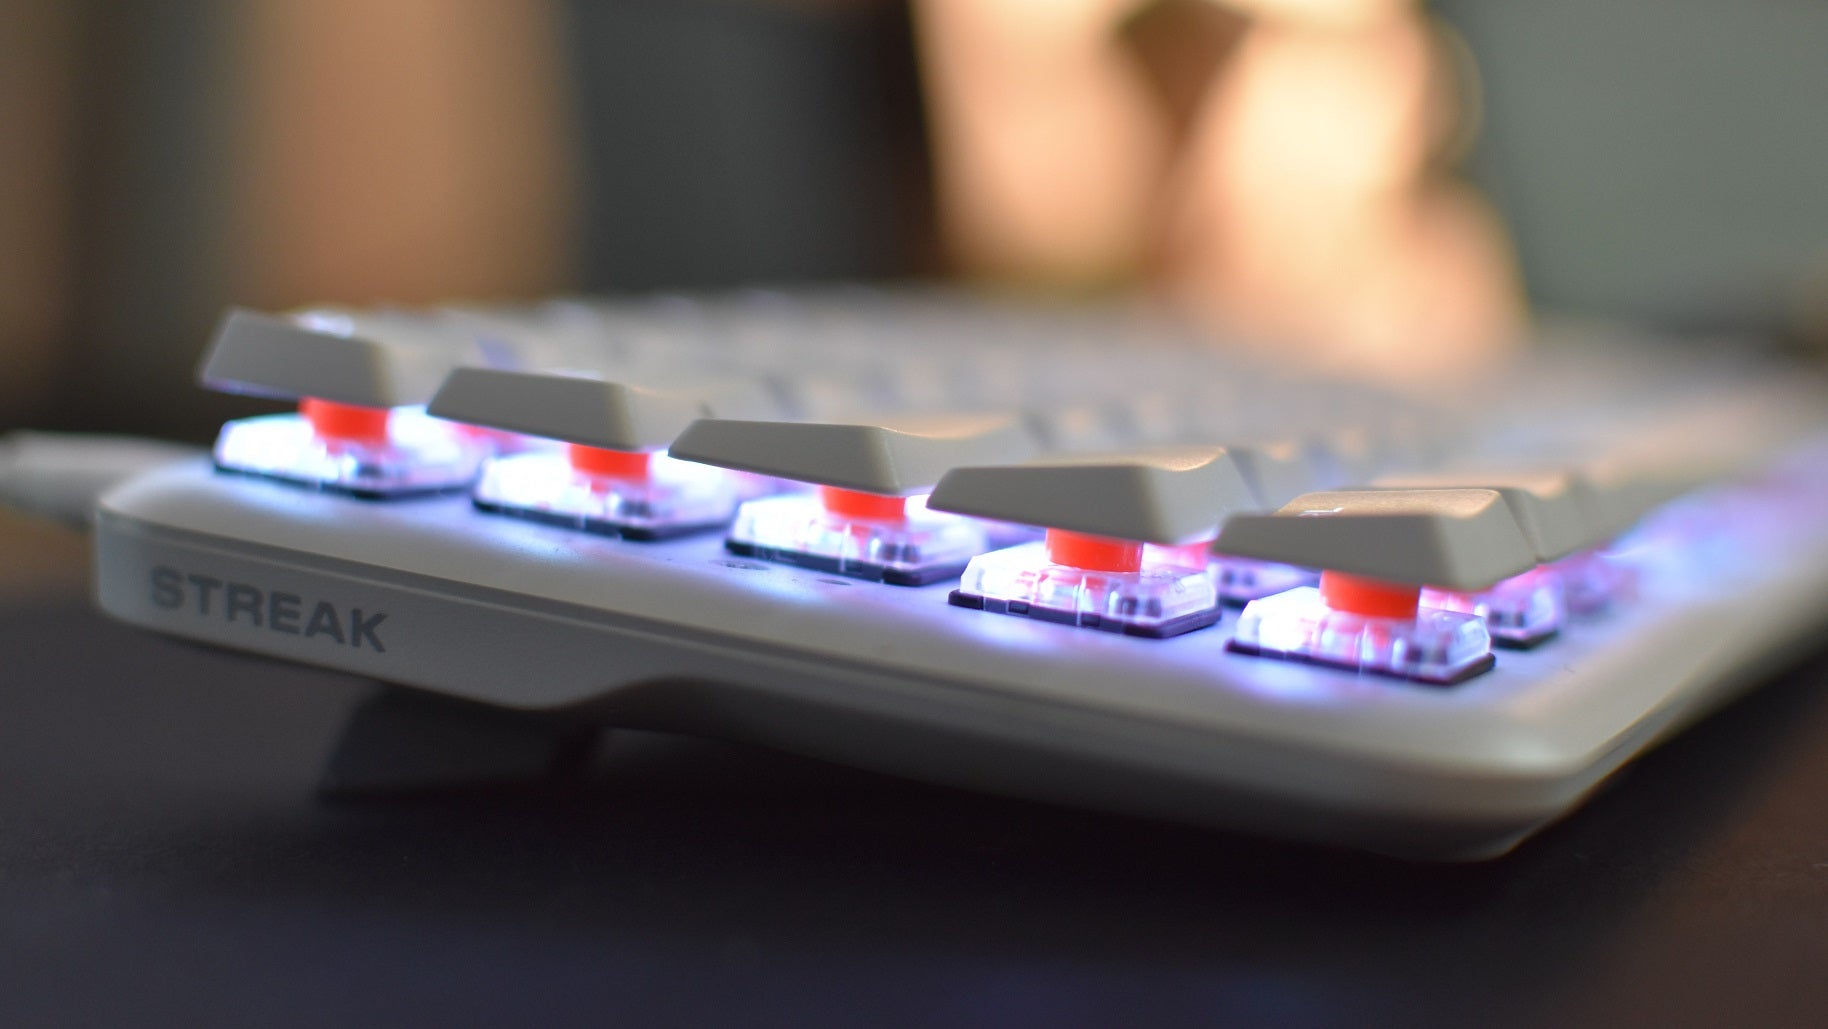 Side view of the Fnatic Streak65 LP gaming keyboard, showing its low profile mechanical switches.